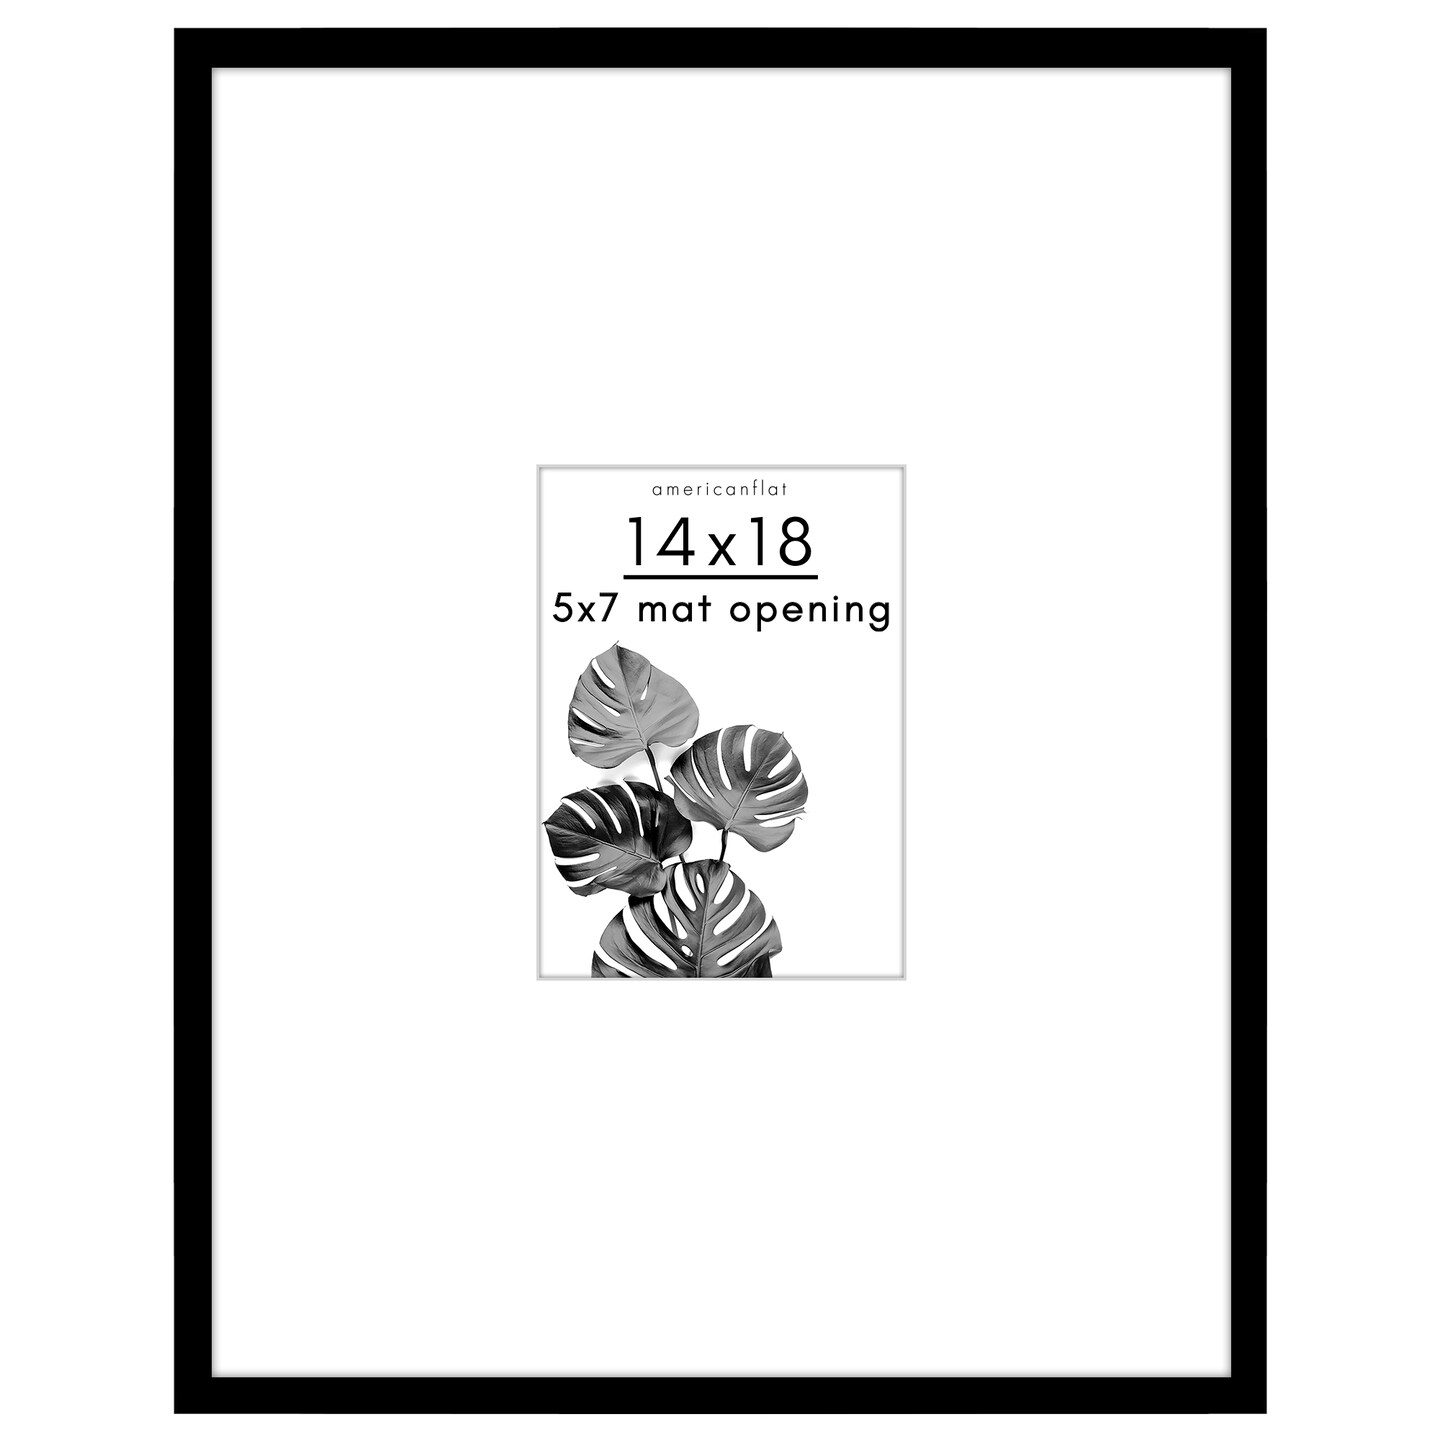 ArtToFrames 24x30 inch Black Custom Mat for Picture Frame with Opening for 20x26 inch Photos. Mat Only, Frame Not Included (mat-21), Size: 24x30 (FOR